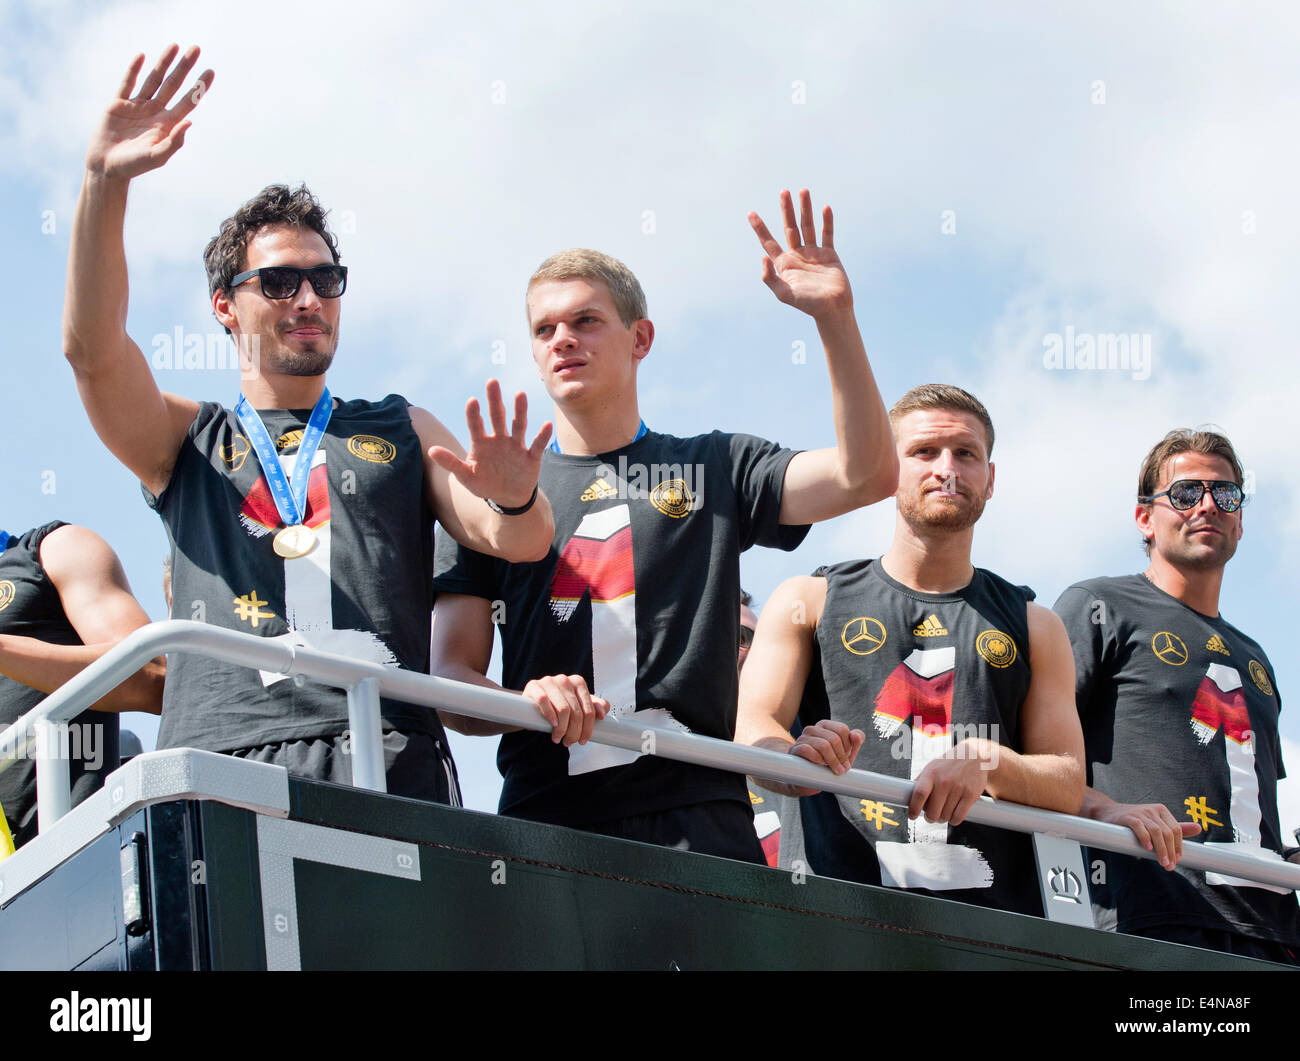 Berlin, Germany. 15th July, 2014. German national soccer players Mats Hummels (L-R), Matthias Ginter, Shkodran Mustafi and Roman Weidenfeller celebrate during their drive to Brandenburg Gate in Berlin, Germany, 15 July 2014. The German team on 13 July 2014 had won the Brazil 2014 FIFA Soccer World Cup final against Argentina by 1-0 to win the title for the fourth time after 1954, 1974 and 1990. Photo: Bernd von Jutrczenka/dpa/Alamy Live News Stock Photo